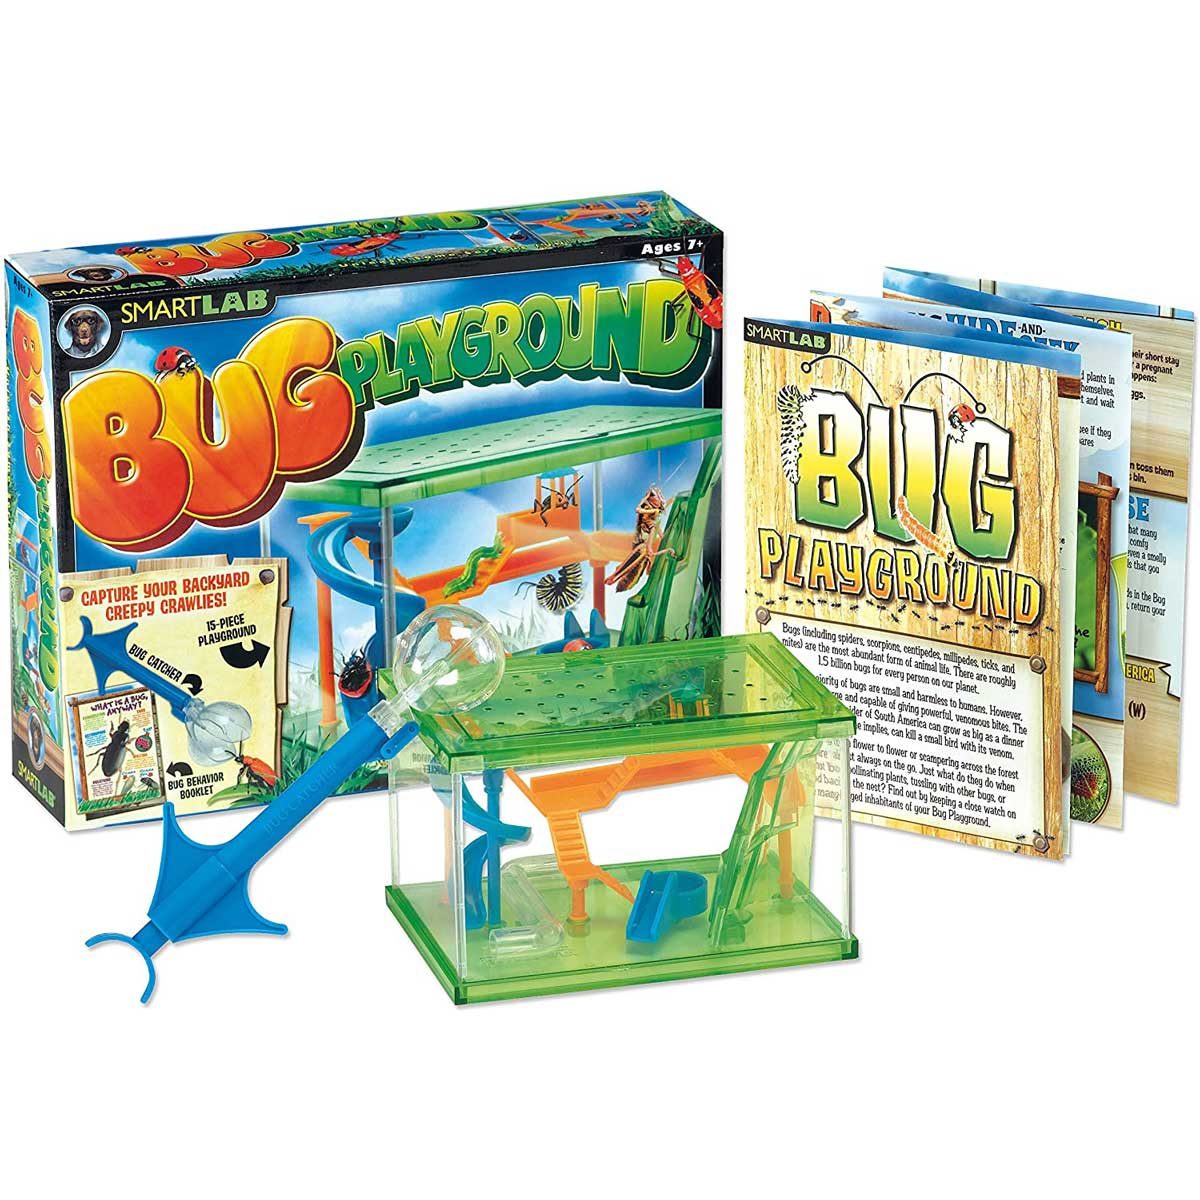 <p>Watch your children learn about nature's biodiversity first hand — the 15-piece <a href="https://www.amazon.com/Smart-Lab-09407-SmartLab-Playground/dp/1603800689" rel="noopener noreferrer">SmartLab Bug Playground</a> is an educational STEM toy focused on entomology. Send the kids outside where they can observe and study the behavior of ants, beetles and crickets as these bugs romp around in a mini pool, tube, slide, <a href="https://www.familyhandyman.com/project/how-to-build-a-kids-climbing-wall/">climbing wall</a> and jungle gym. The kit is easy to assemble and includes a bug catcher, base, lidded top, short side walls, long side walls and activity booklet.</p> <p class="listicle-page__cta-button-shop"><a class="shop-btn" href="https://www.amazon.com/Smart-Lab-09407-SmartLab-Playground/dp/1603800689">Shop Now</a></p>